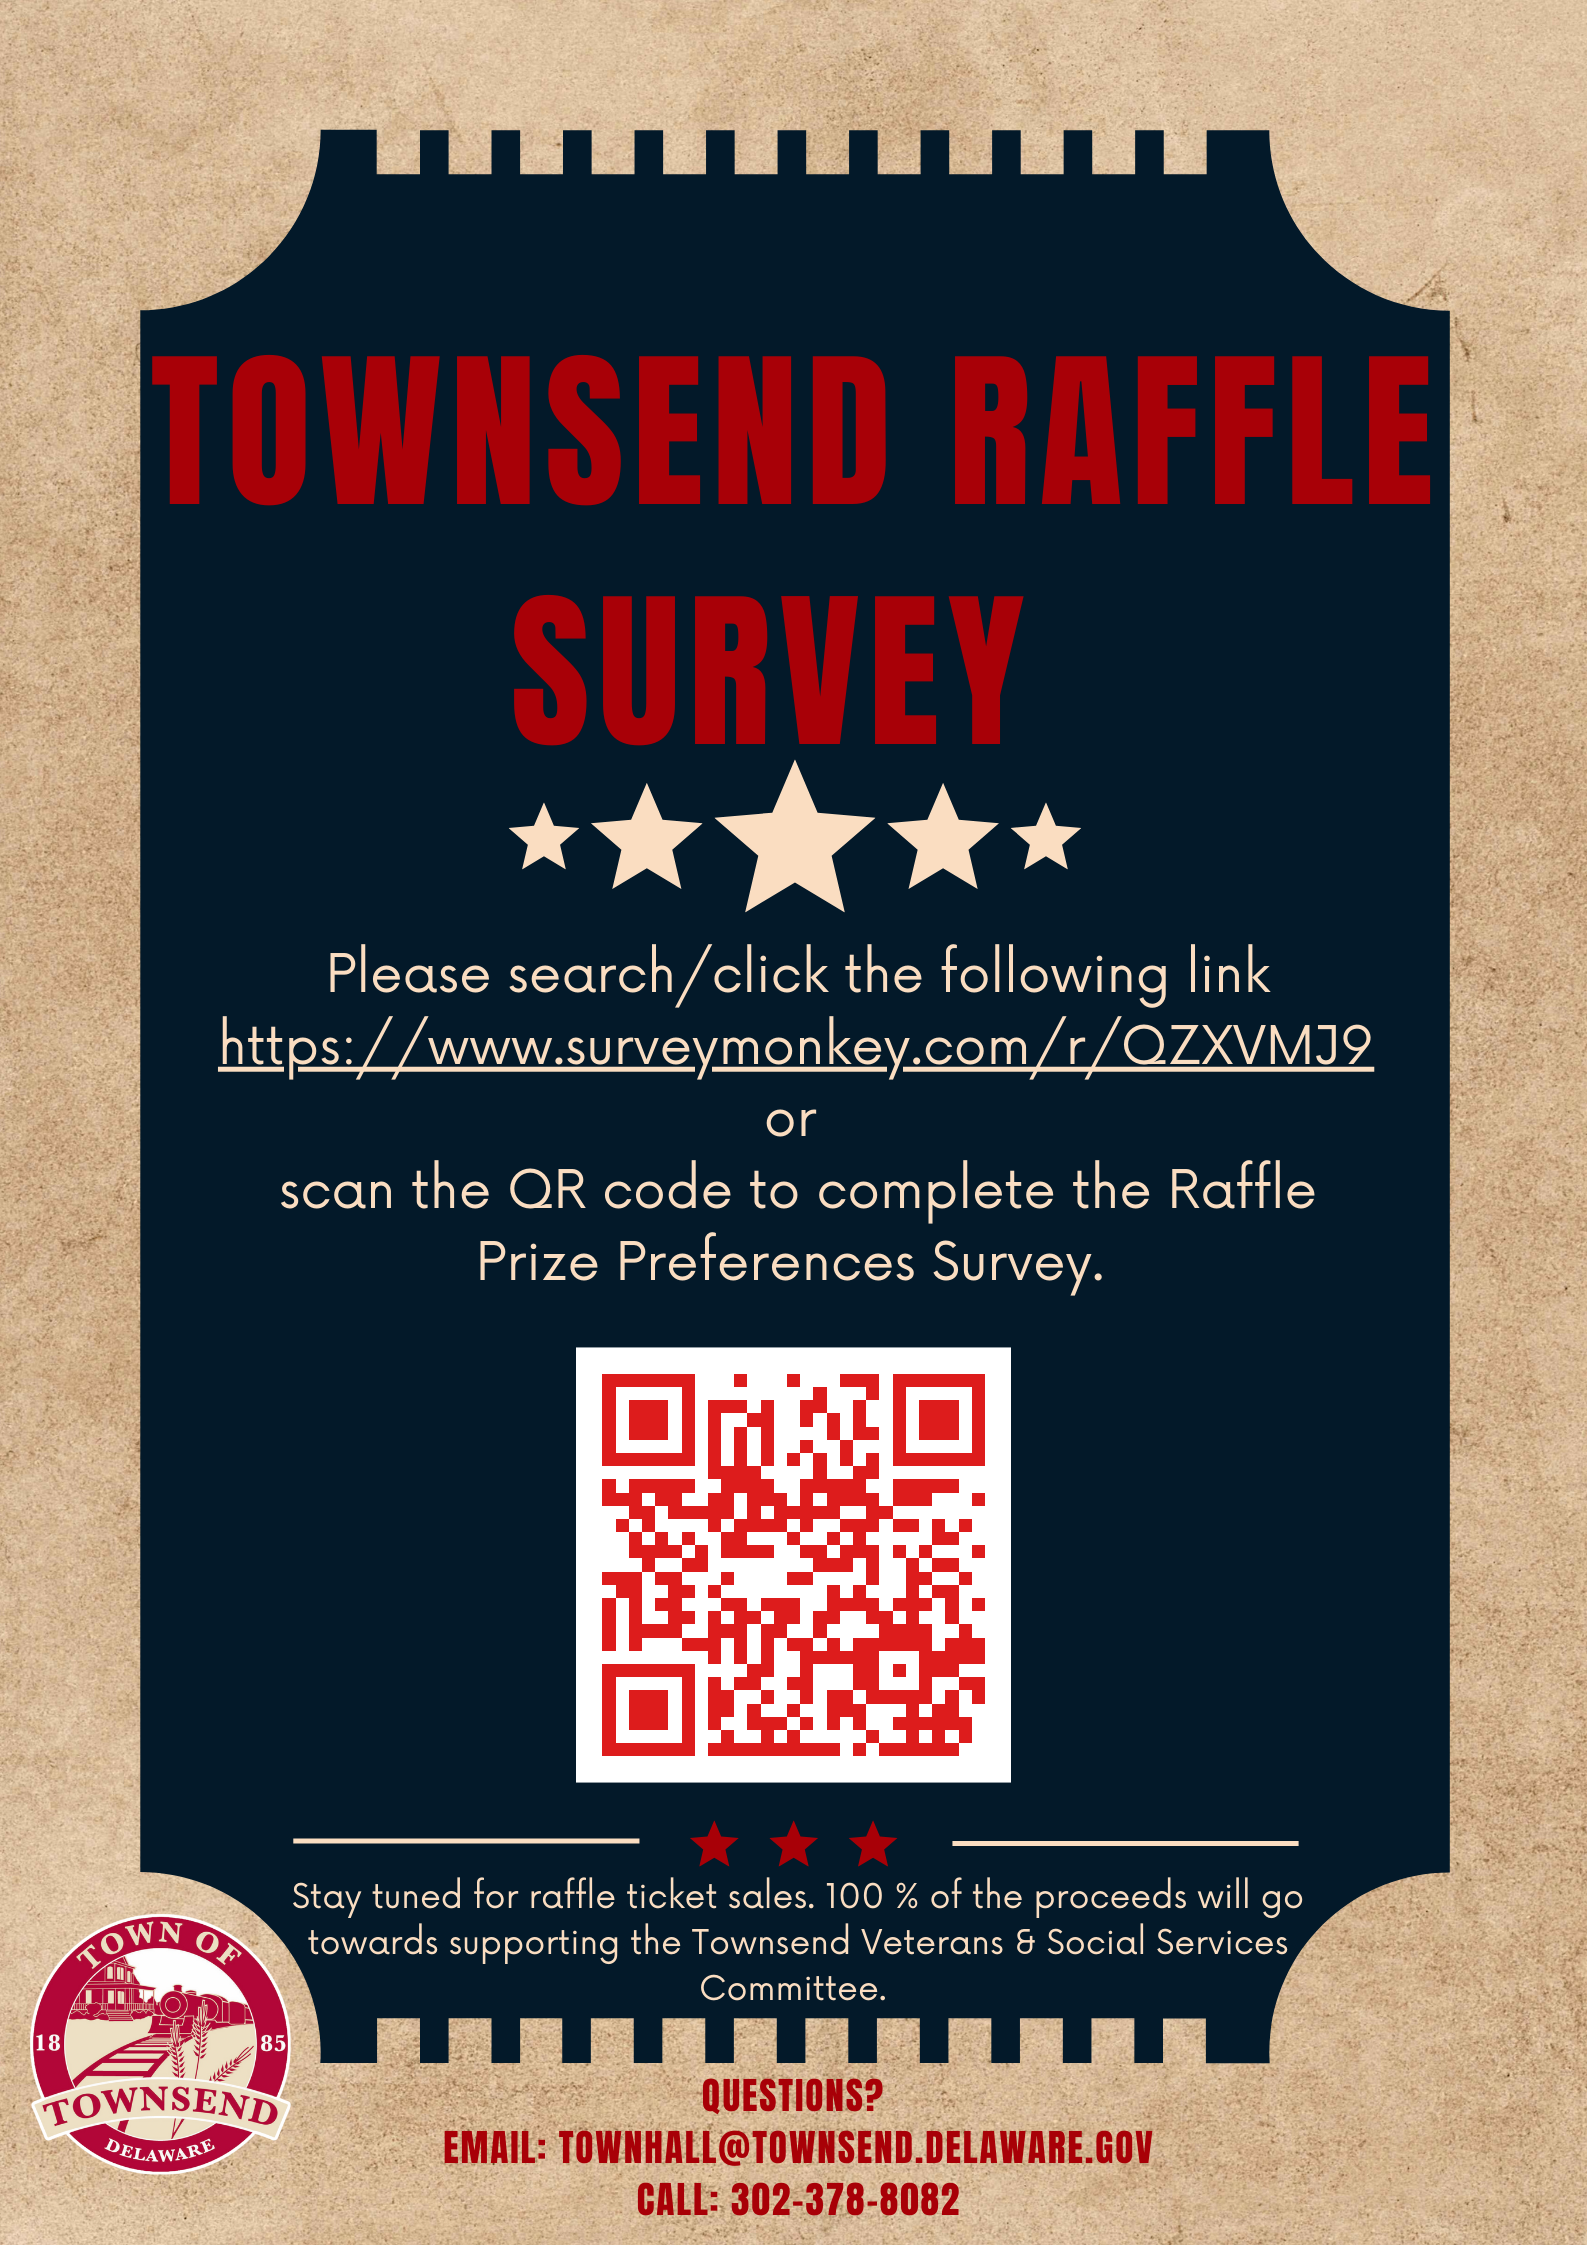 Survey Monkey Raffle Flyer - TOWNSEND RAFFLE SURVEY Please search/click the following link https://www.surveymonkey.com/r/QZXVMJ9 or scan the QR code to complete the Raffle Prize Preferences Survey. Stay tuned for raffle ticket sales. 100 % of the proceeds will go towards supporting the Townsend Veterans & Social Services Committee. QUESTIONS? EMAIL: TOWNHALL@TOWNSEND.DELAWARE.GOV CALL: 302-378-8082